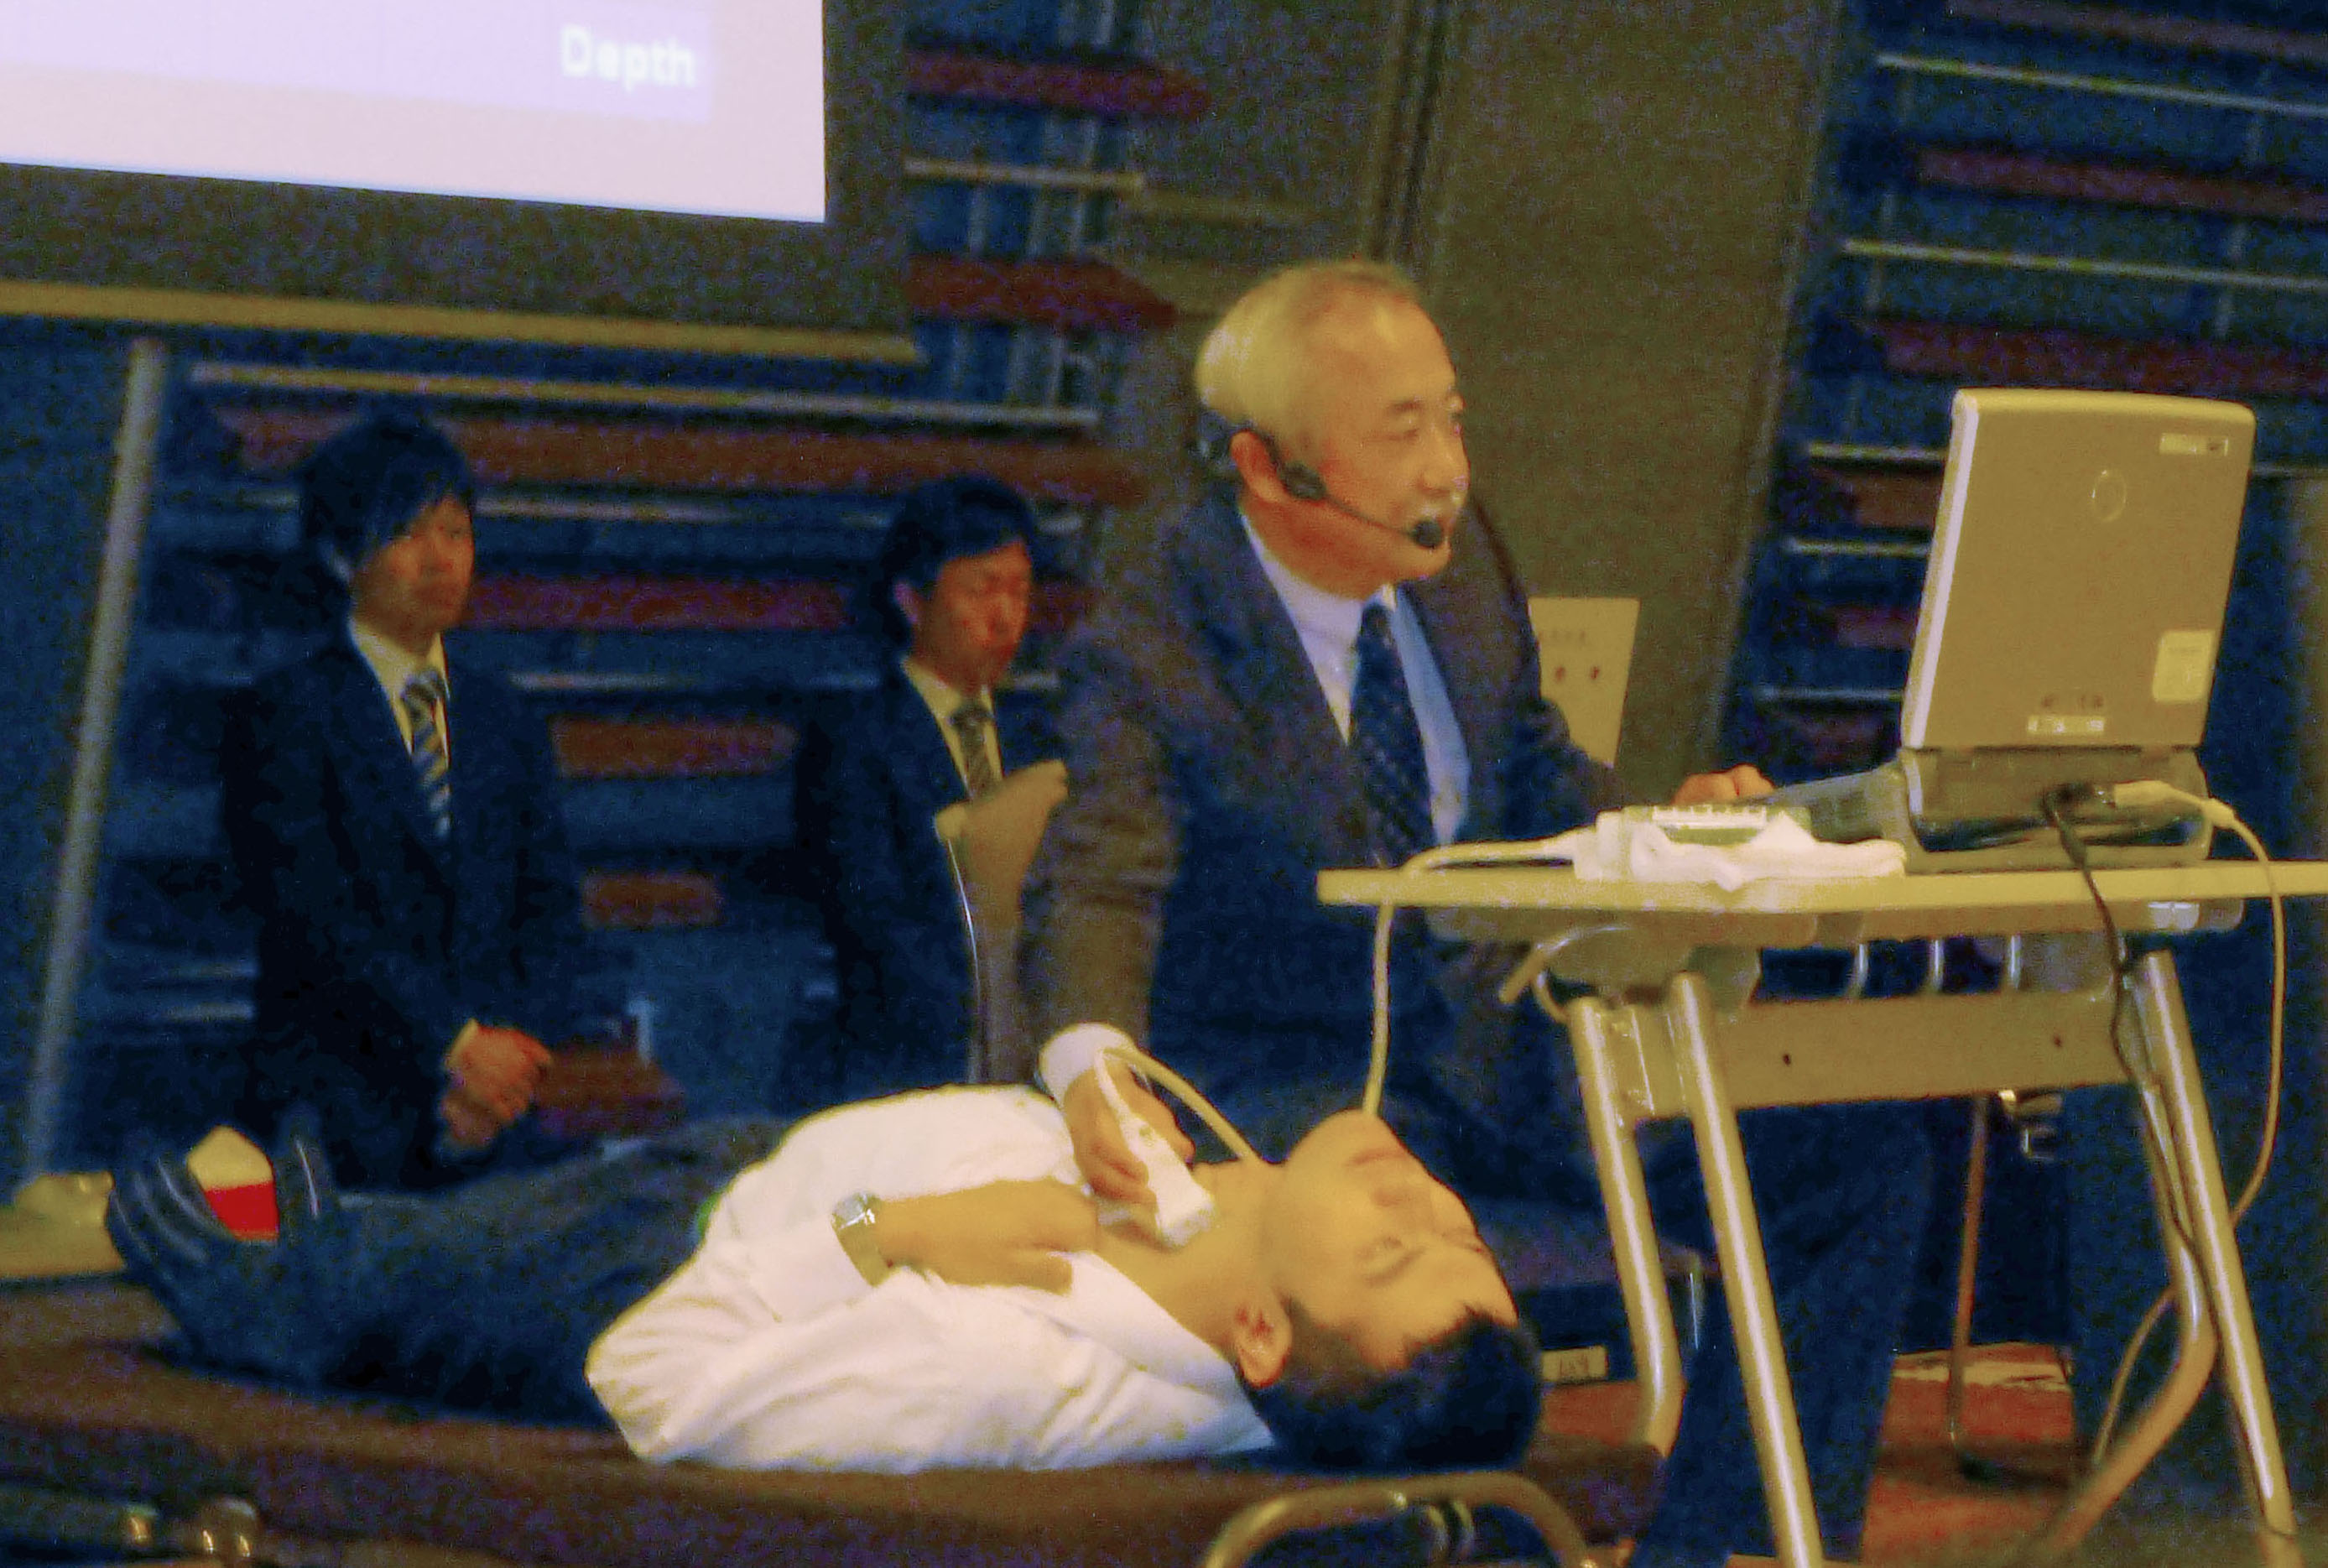 Fallout check: Professor Shinichi Suzuki of Fukushima Medical University, who has been involved in thyroid checks on local children exposed to the nuclear plant disaster, demonstrates the examination process during a meeting with parents in November in Koriyama, Fukushima Prefecture. | KYODO